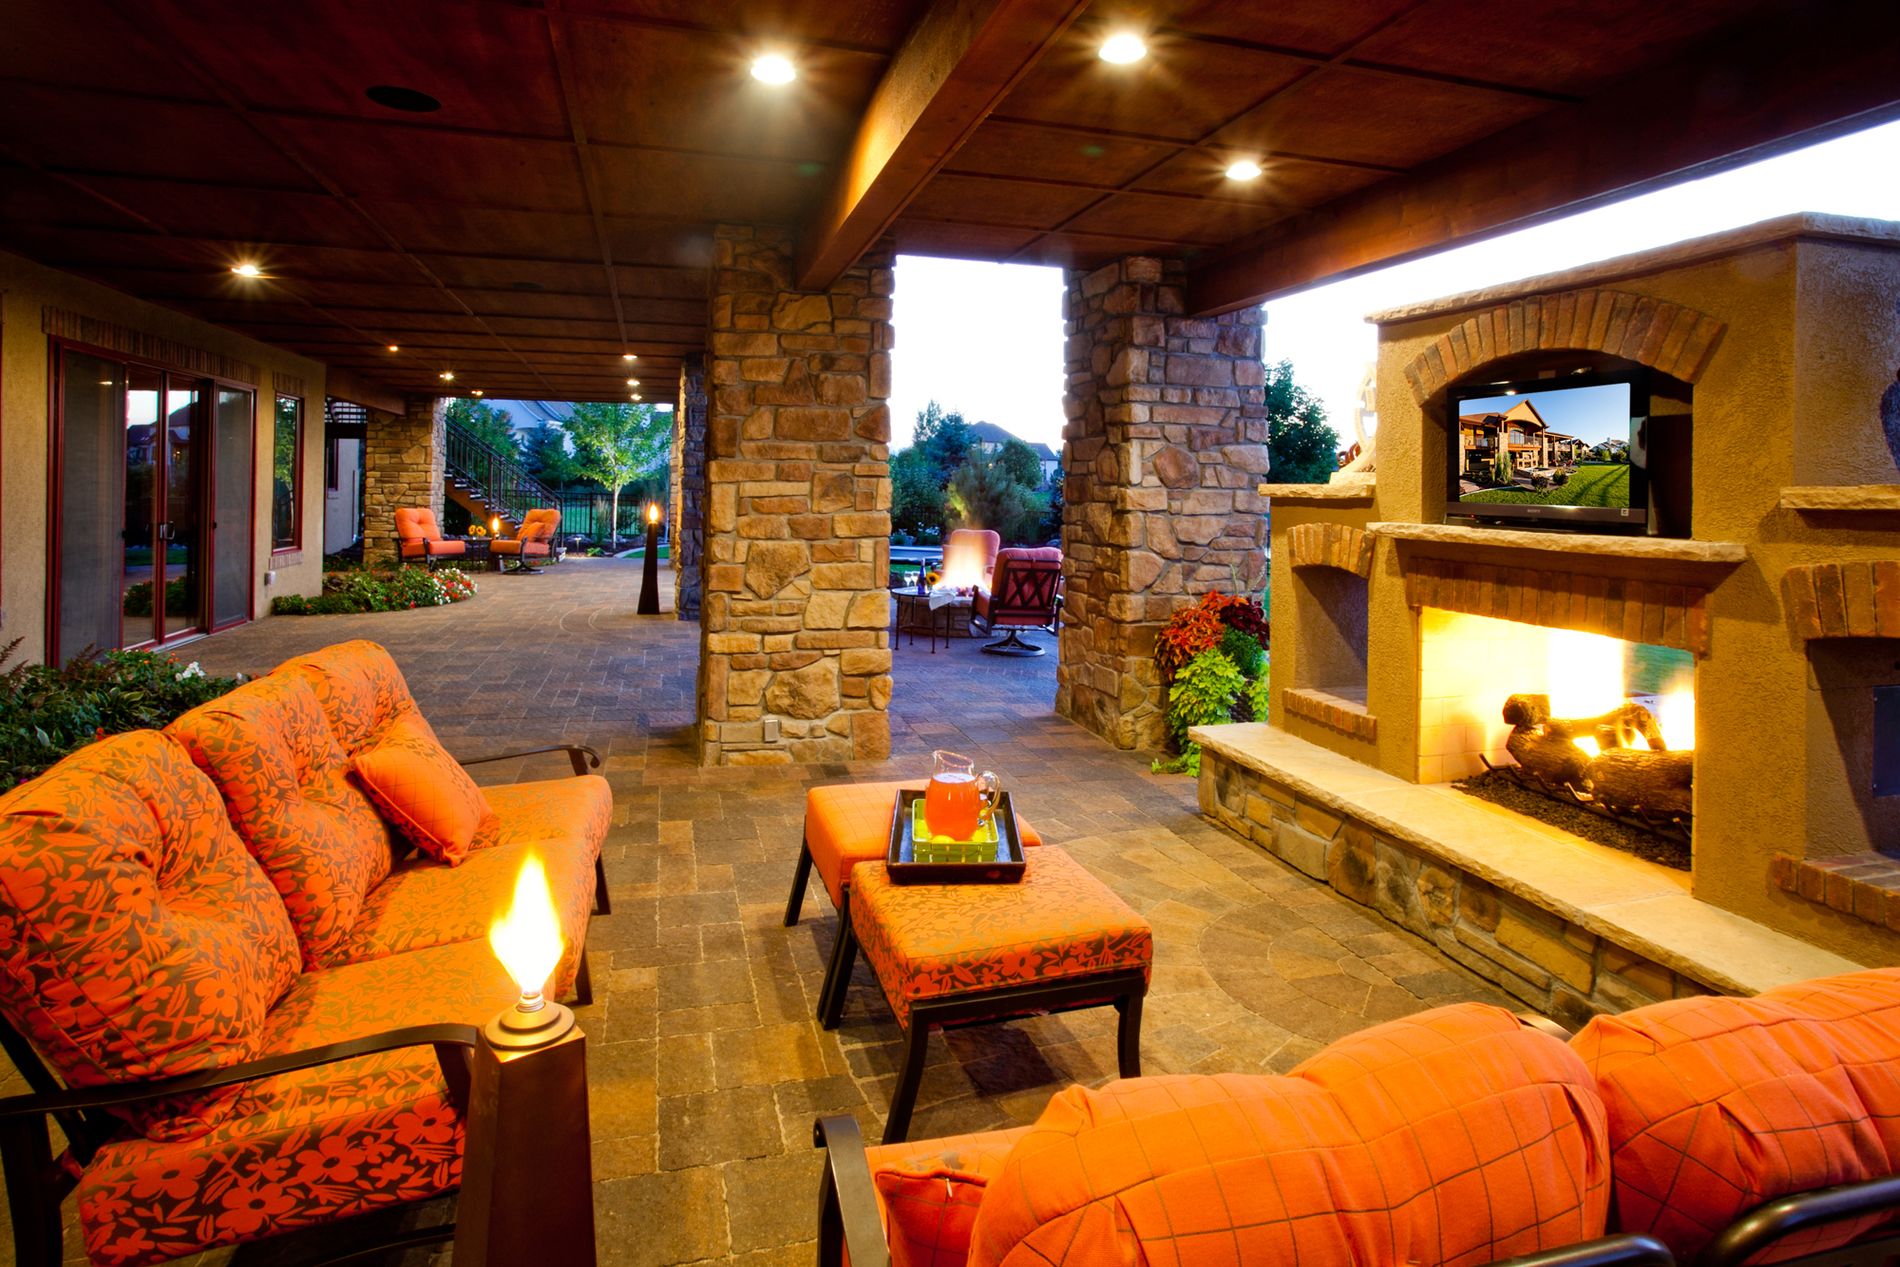 See through fireplace with television and paver patio